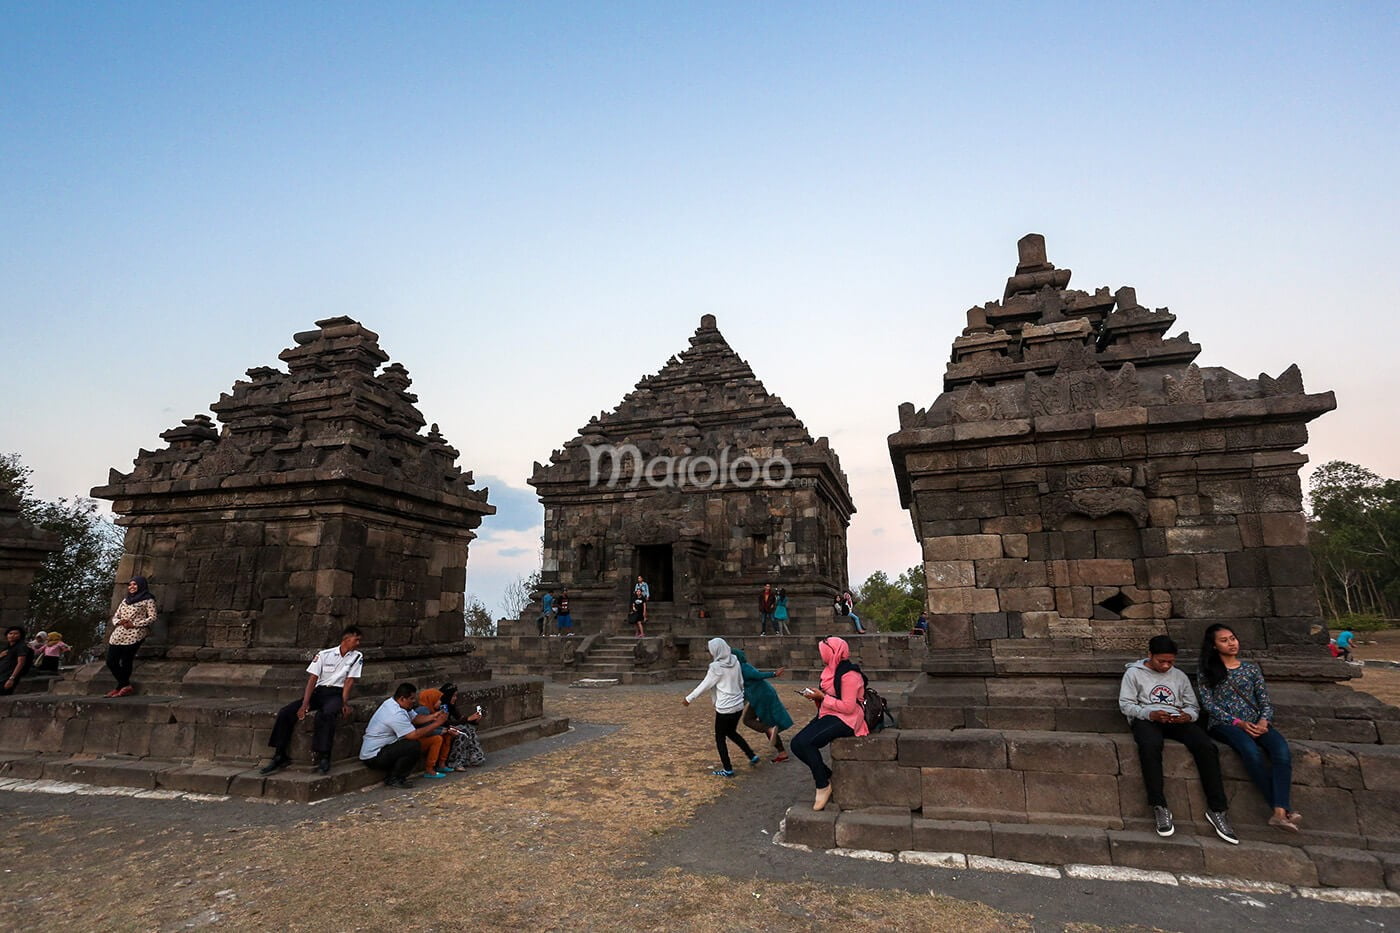 Visitors relaxing and exploring the ancient stone temples of Ijo Temple.